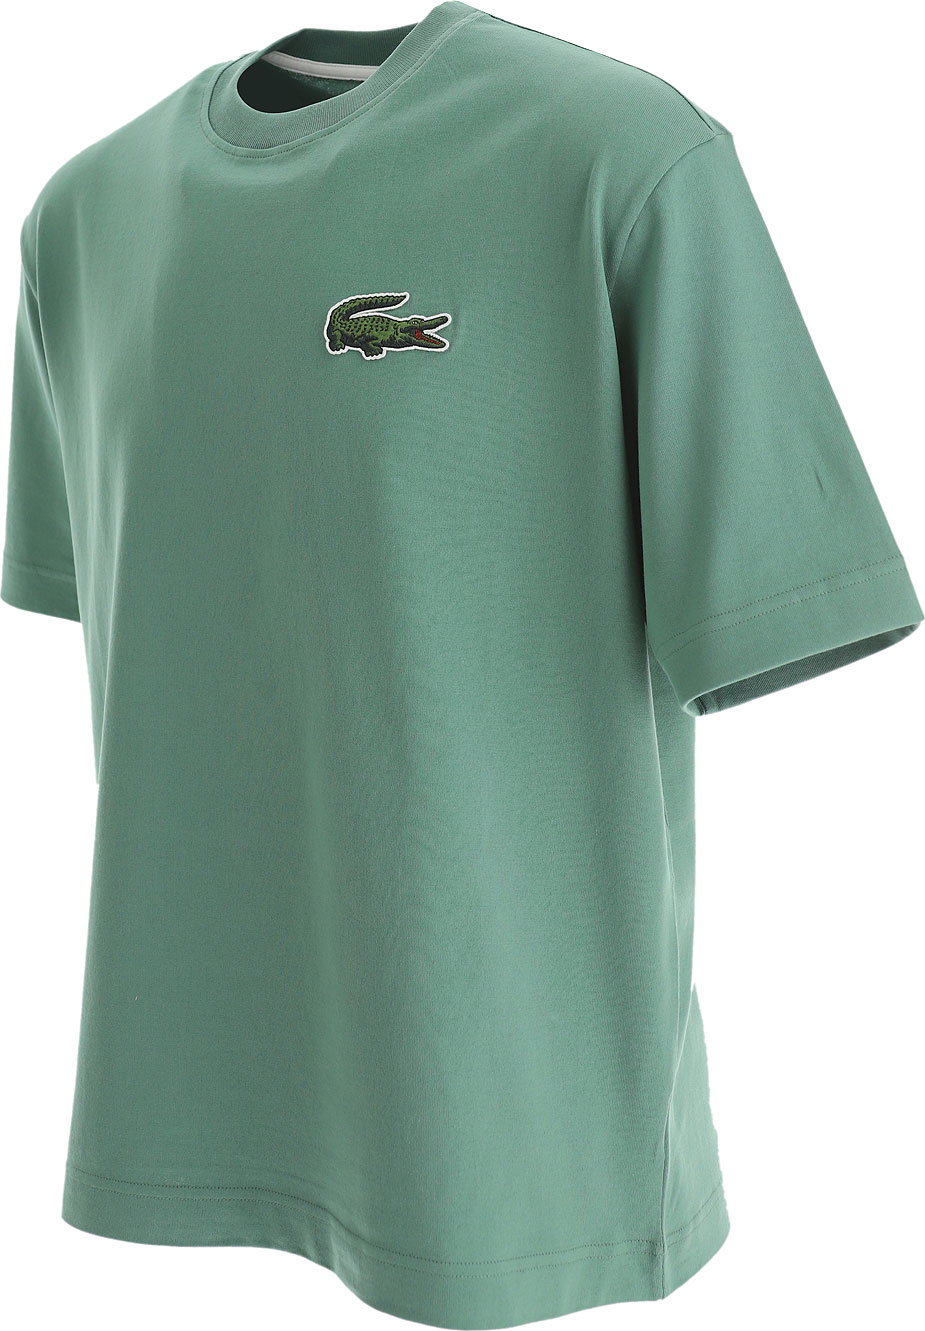 Mens Clothing Lacoste, Style code: th0062-kx5-